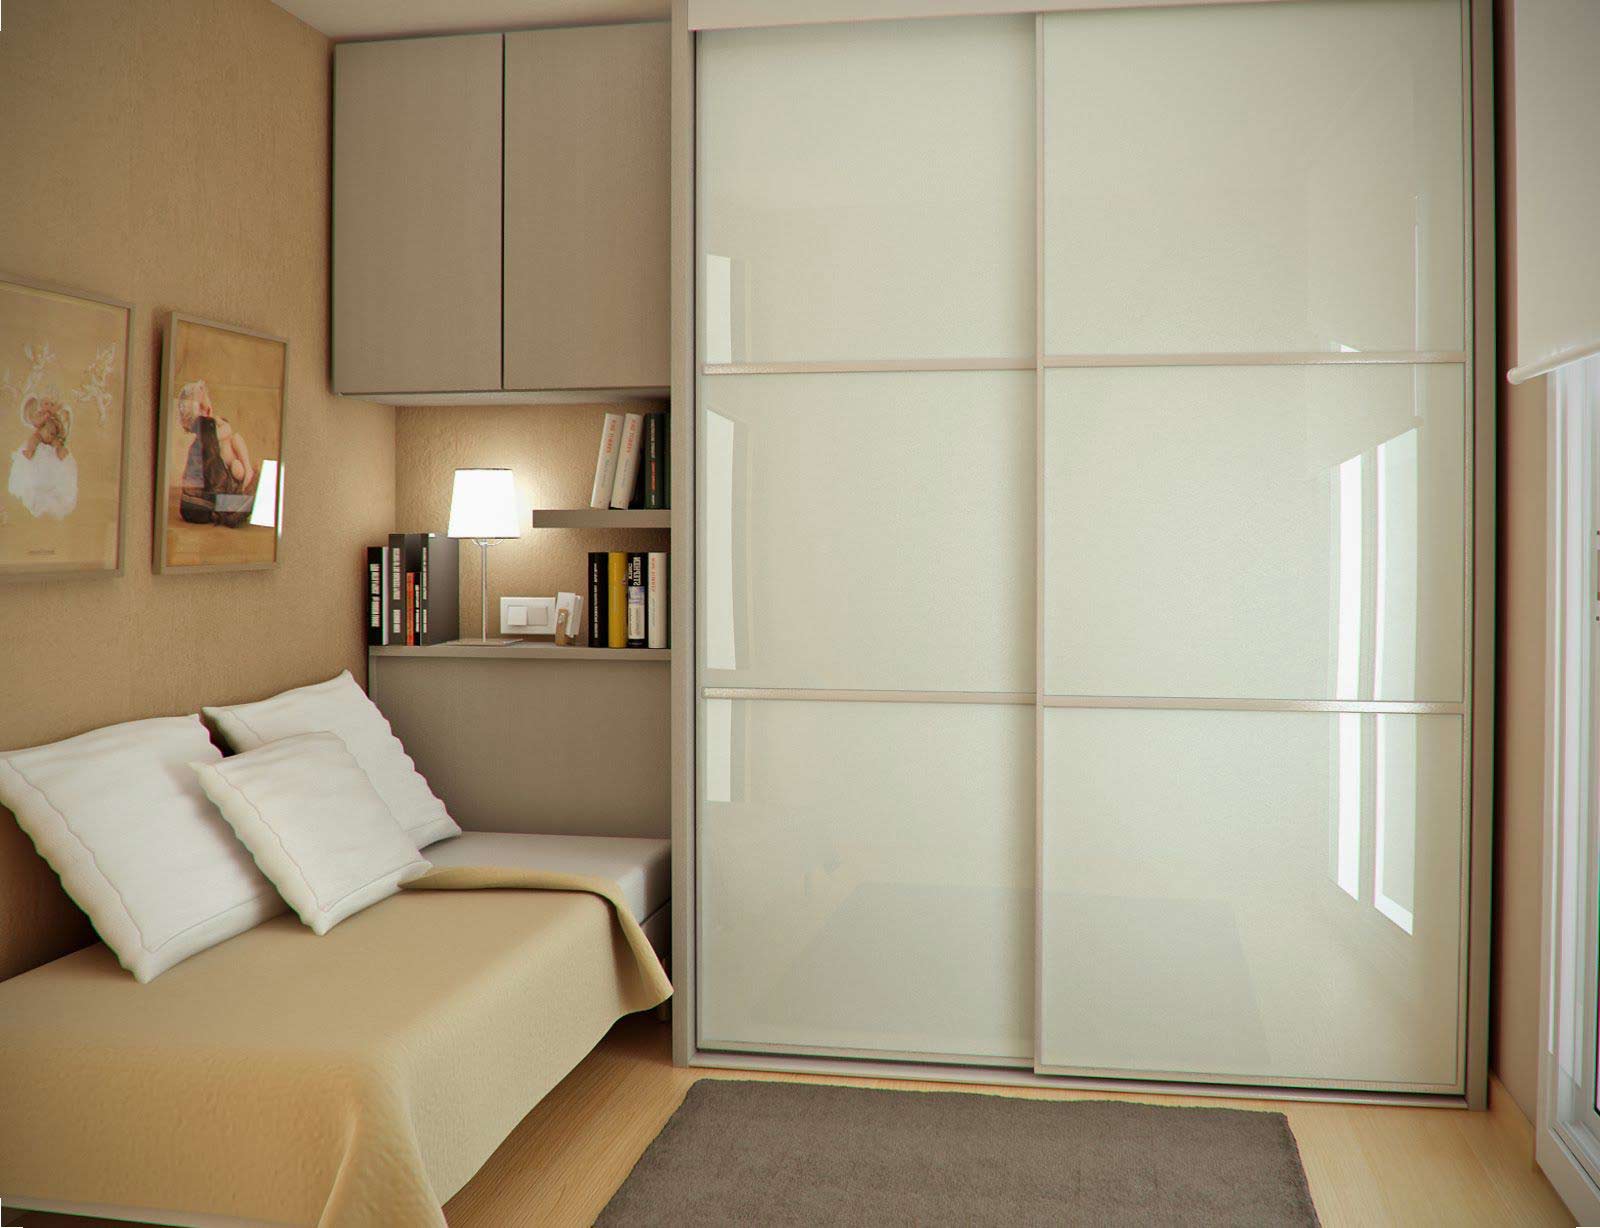 contemporary-white-door-wardrobe-design-with-open-shelve-and-top-lighting-plus-grey-wall-paint-and-wood-floor-in-gurgaon